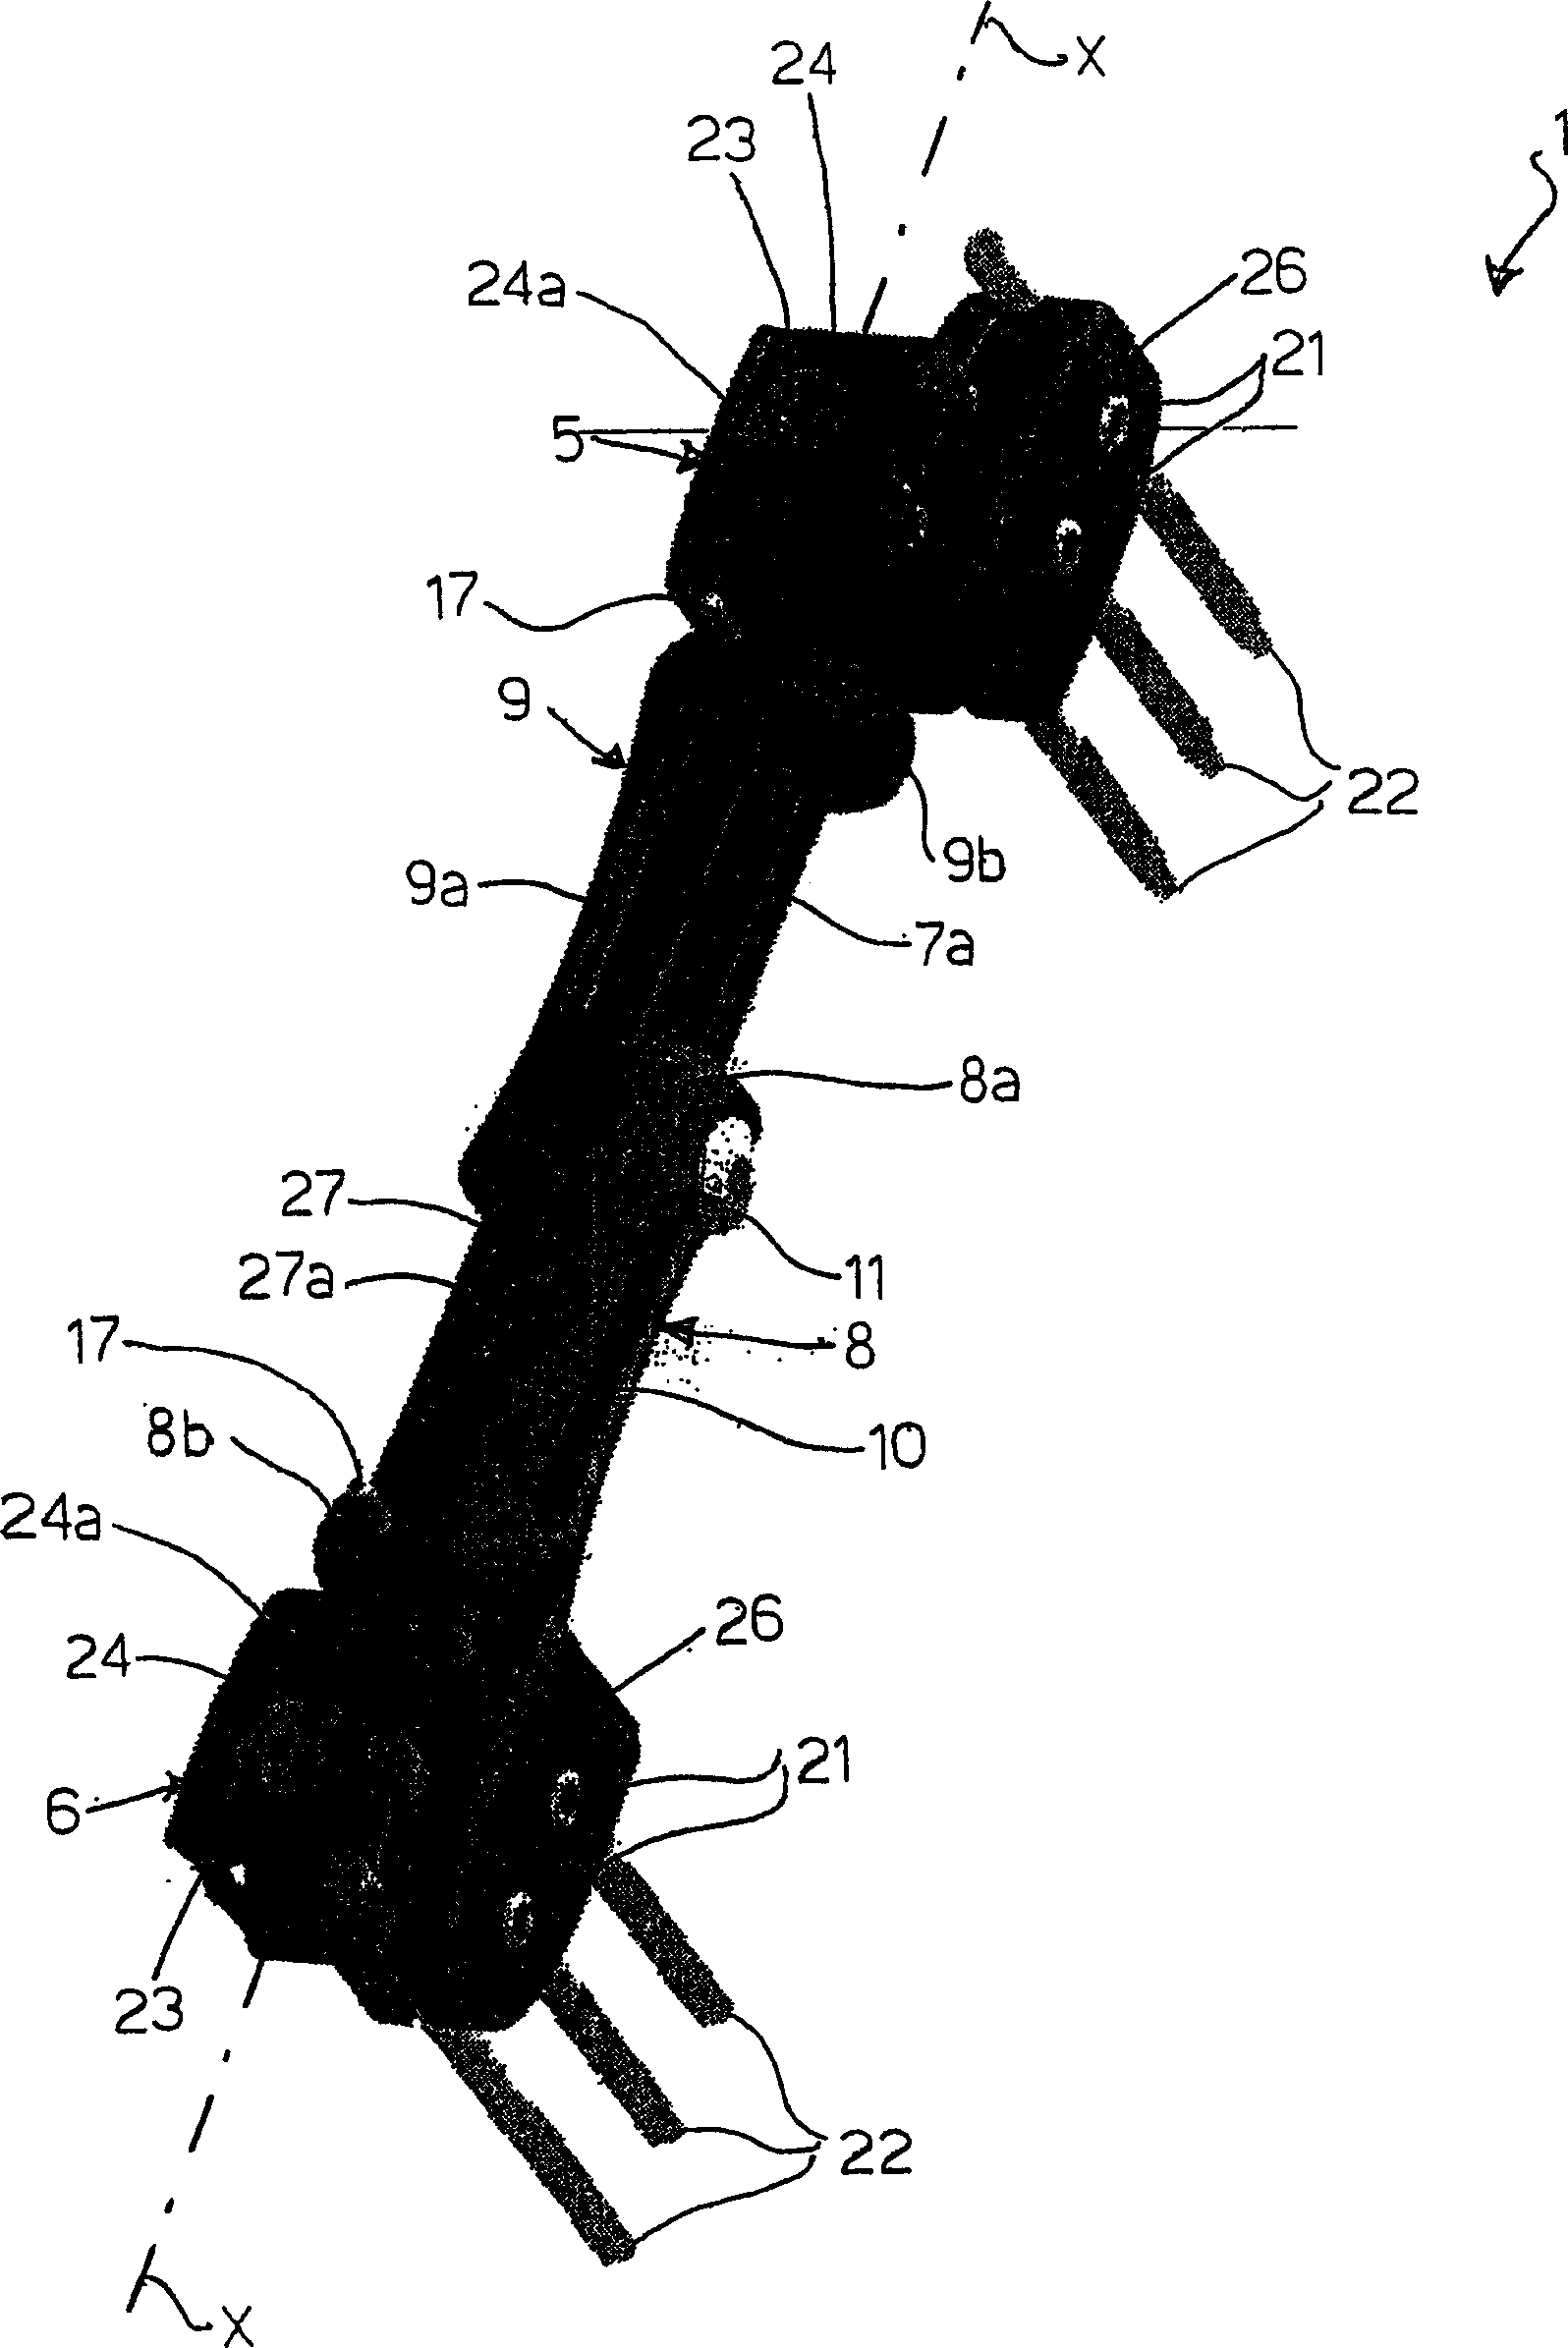 External fixation device for reducing bone fractures